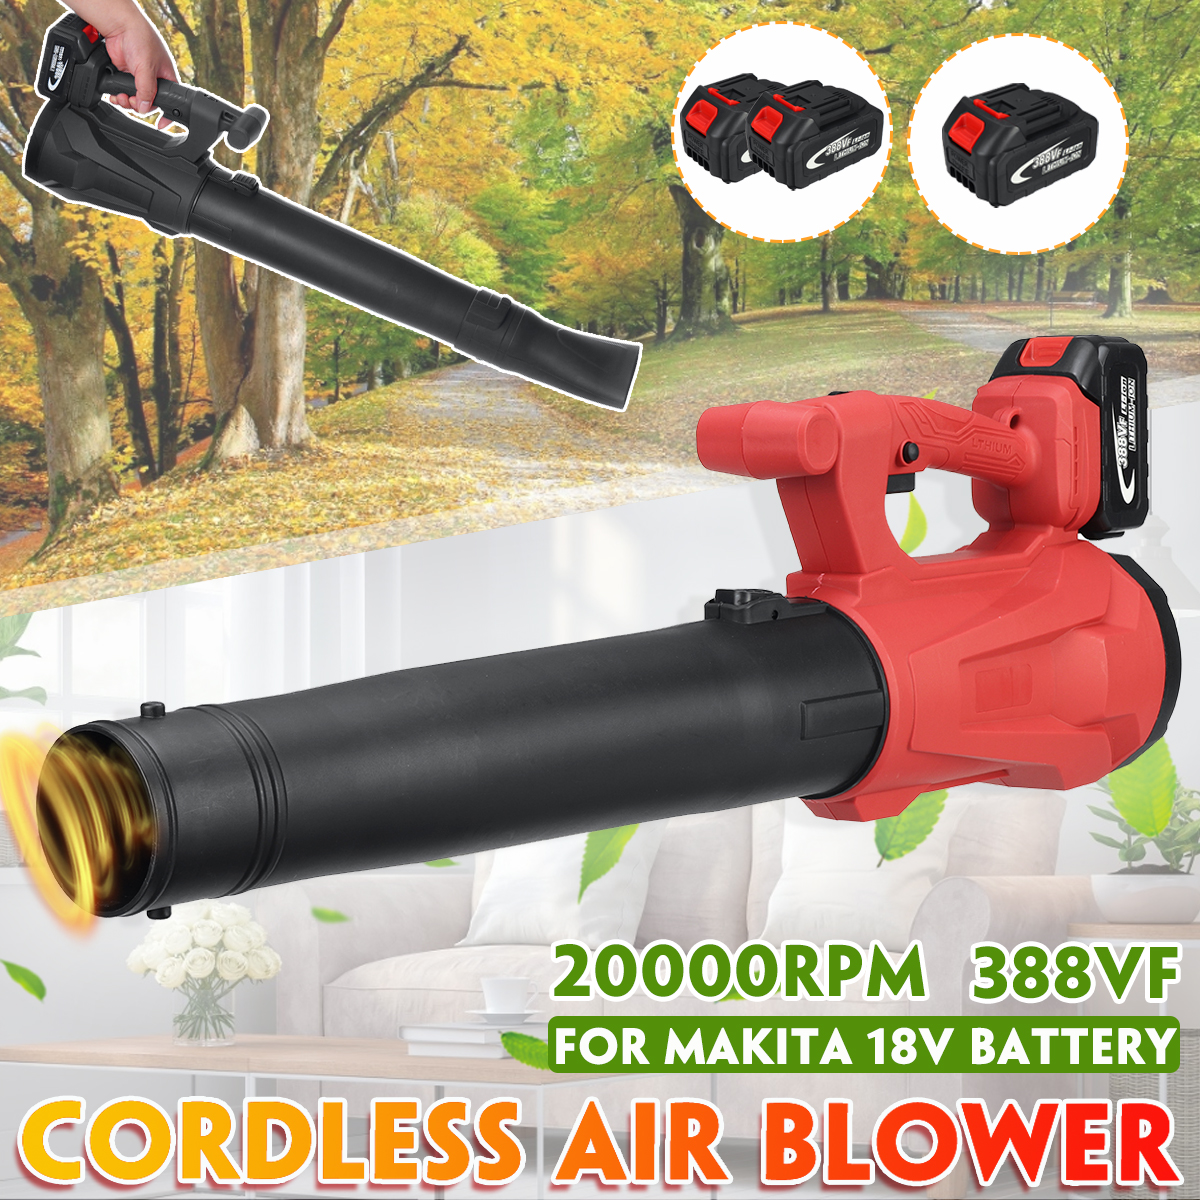 388VF-Cordless-Electric-Air-Blower-Vacuum-Cleannig-Blowing-Dust-Collector-Leaf-Blower-W-None12-Batte-1867747-1